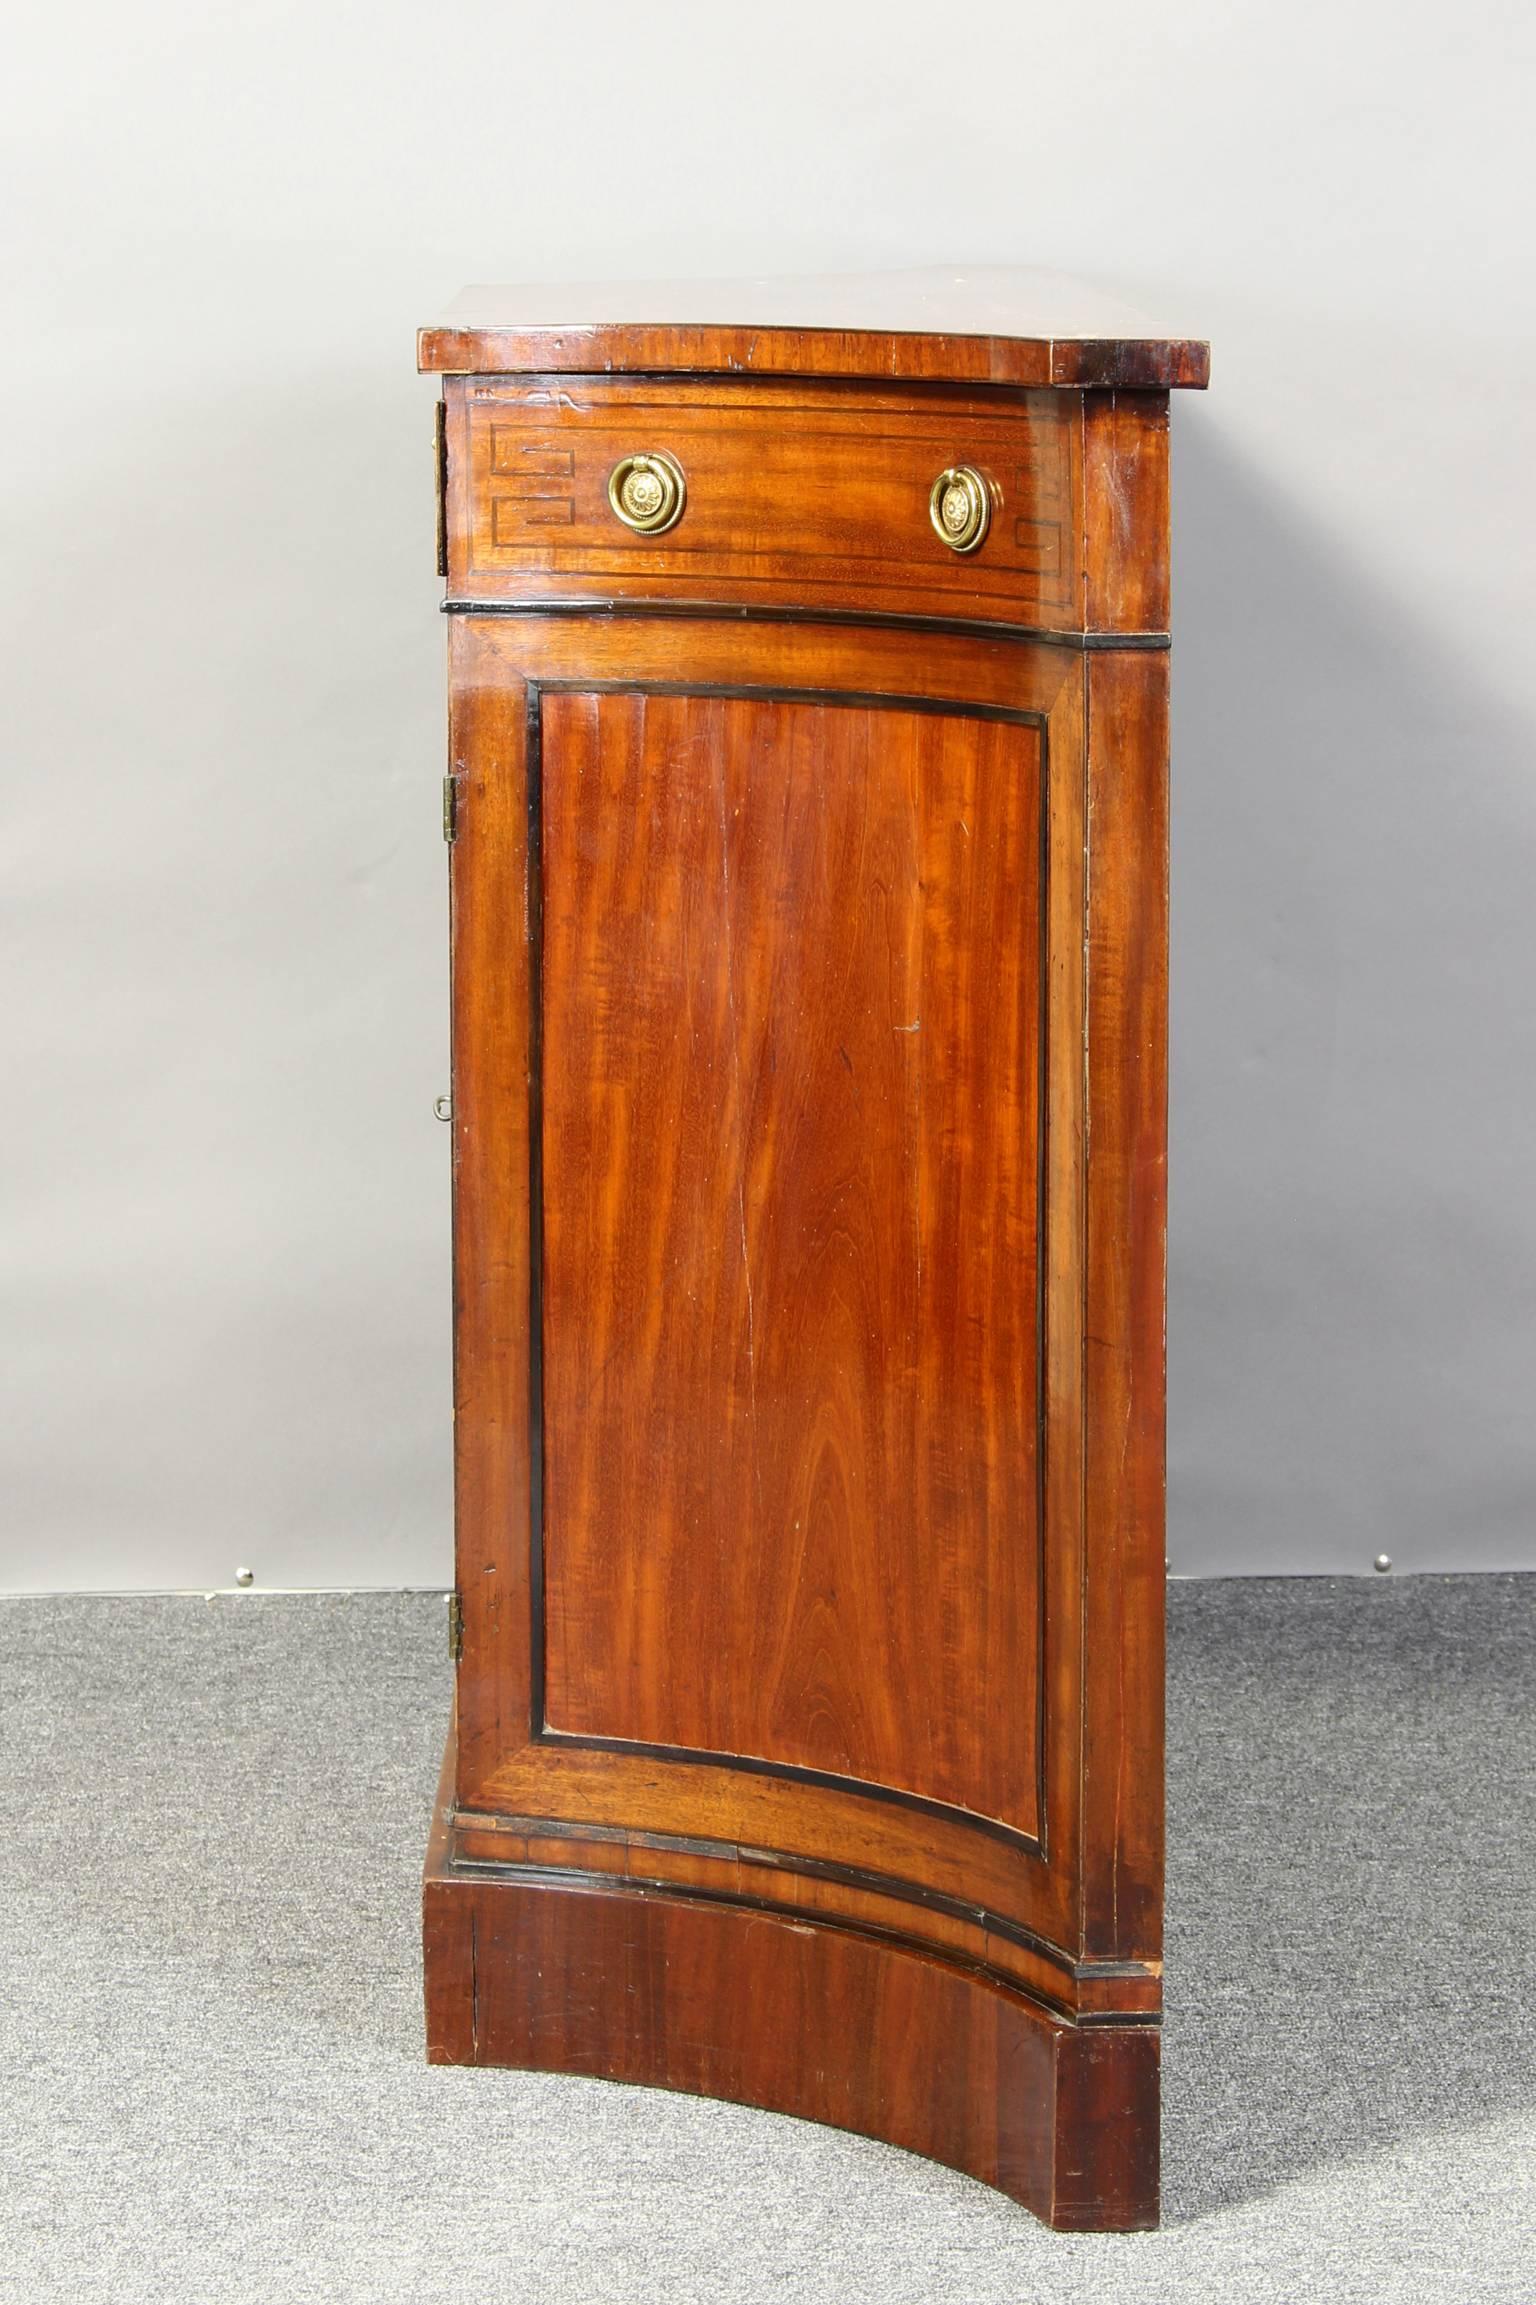 Great Britain (UK) Early 19th Century Regency Credenza For Sale